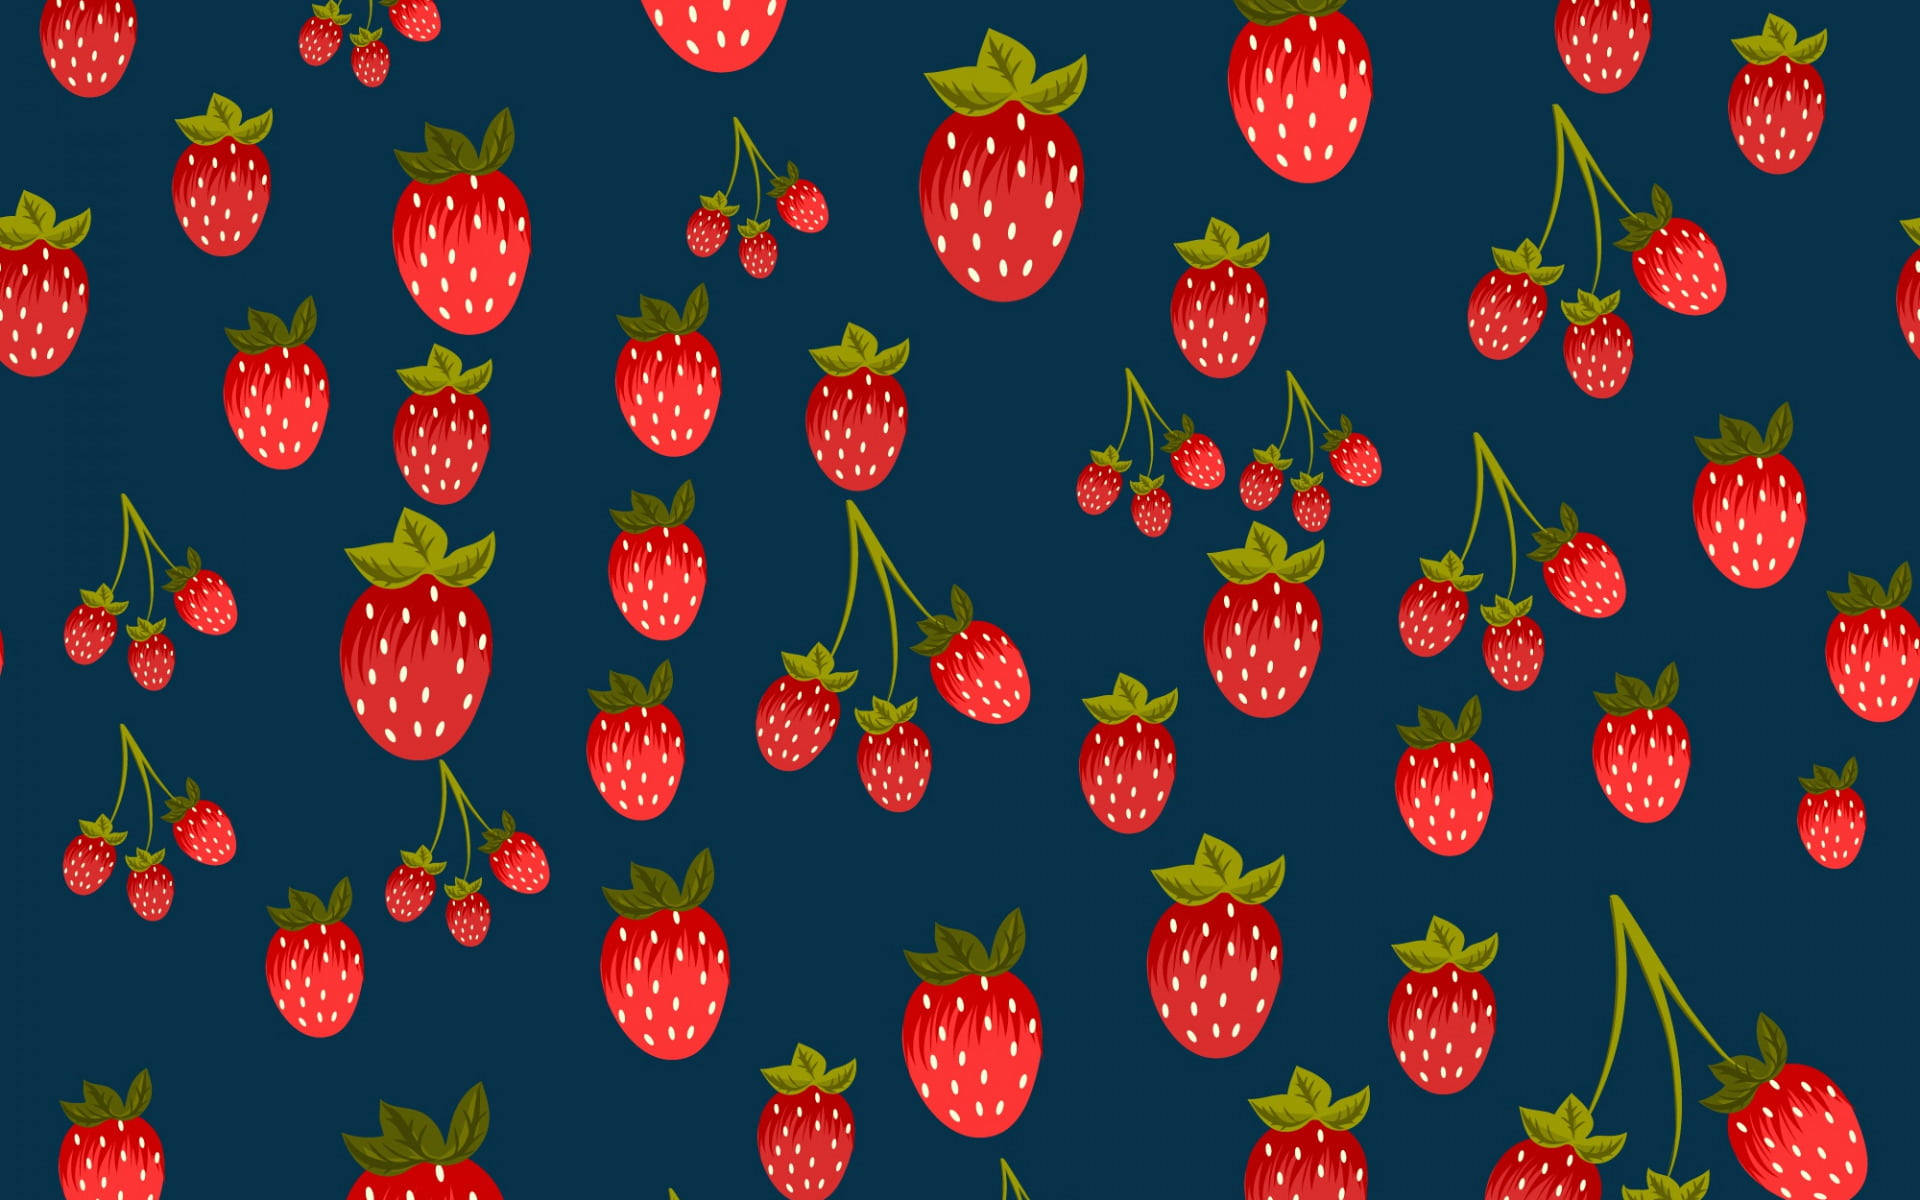 Fun And Quirky Strawberry Desktop Wallpaper